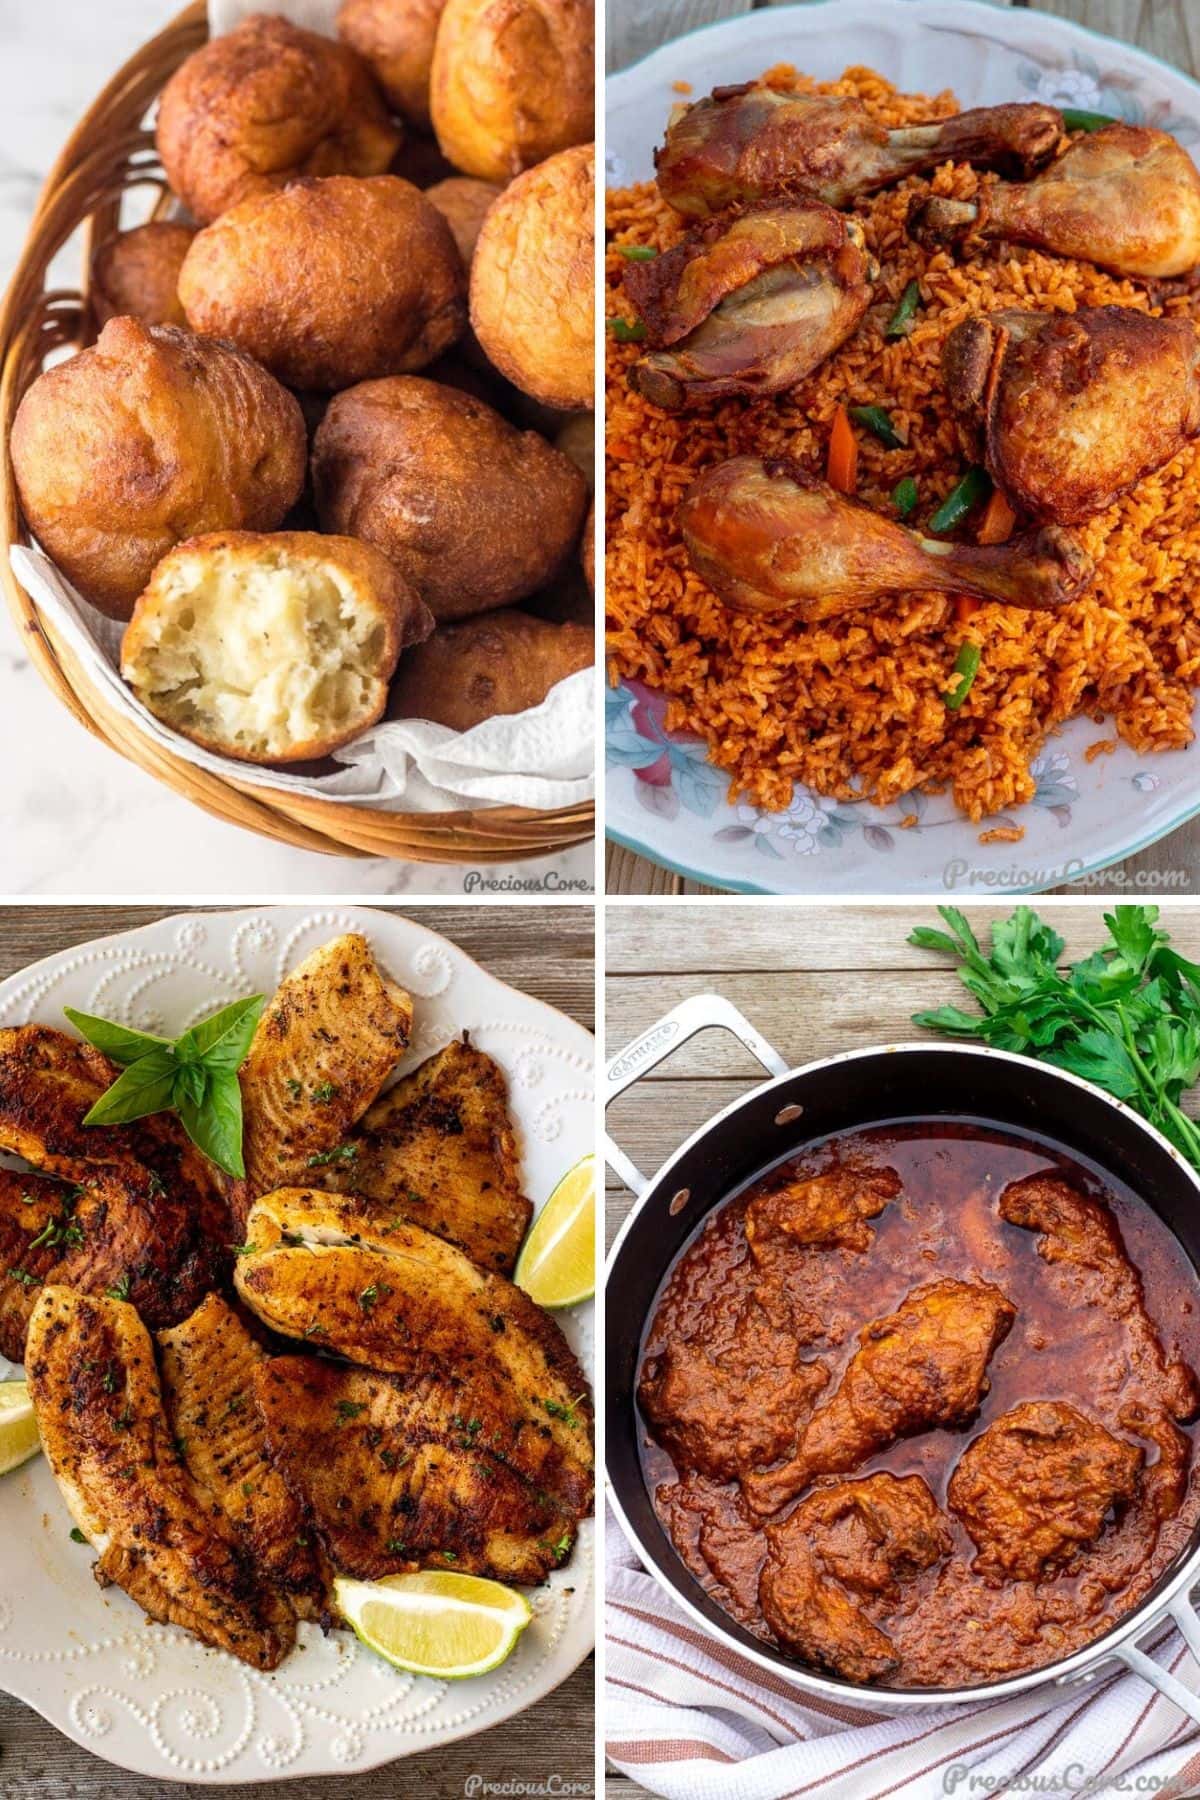 Collage of 4 different images of foods which are part of the top ten 2022 recipes on this website.